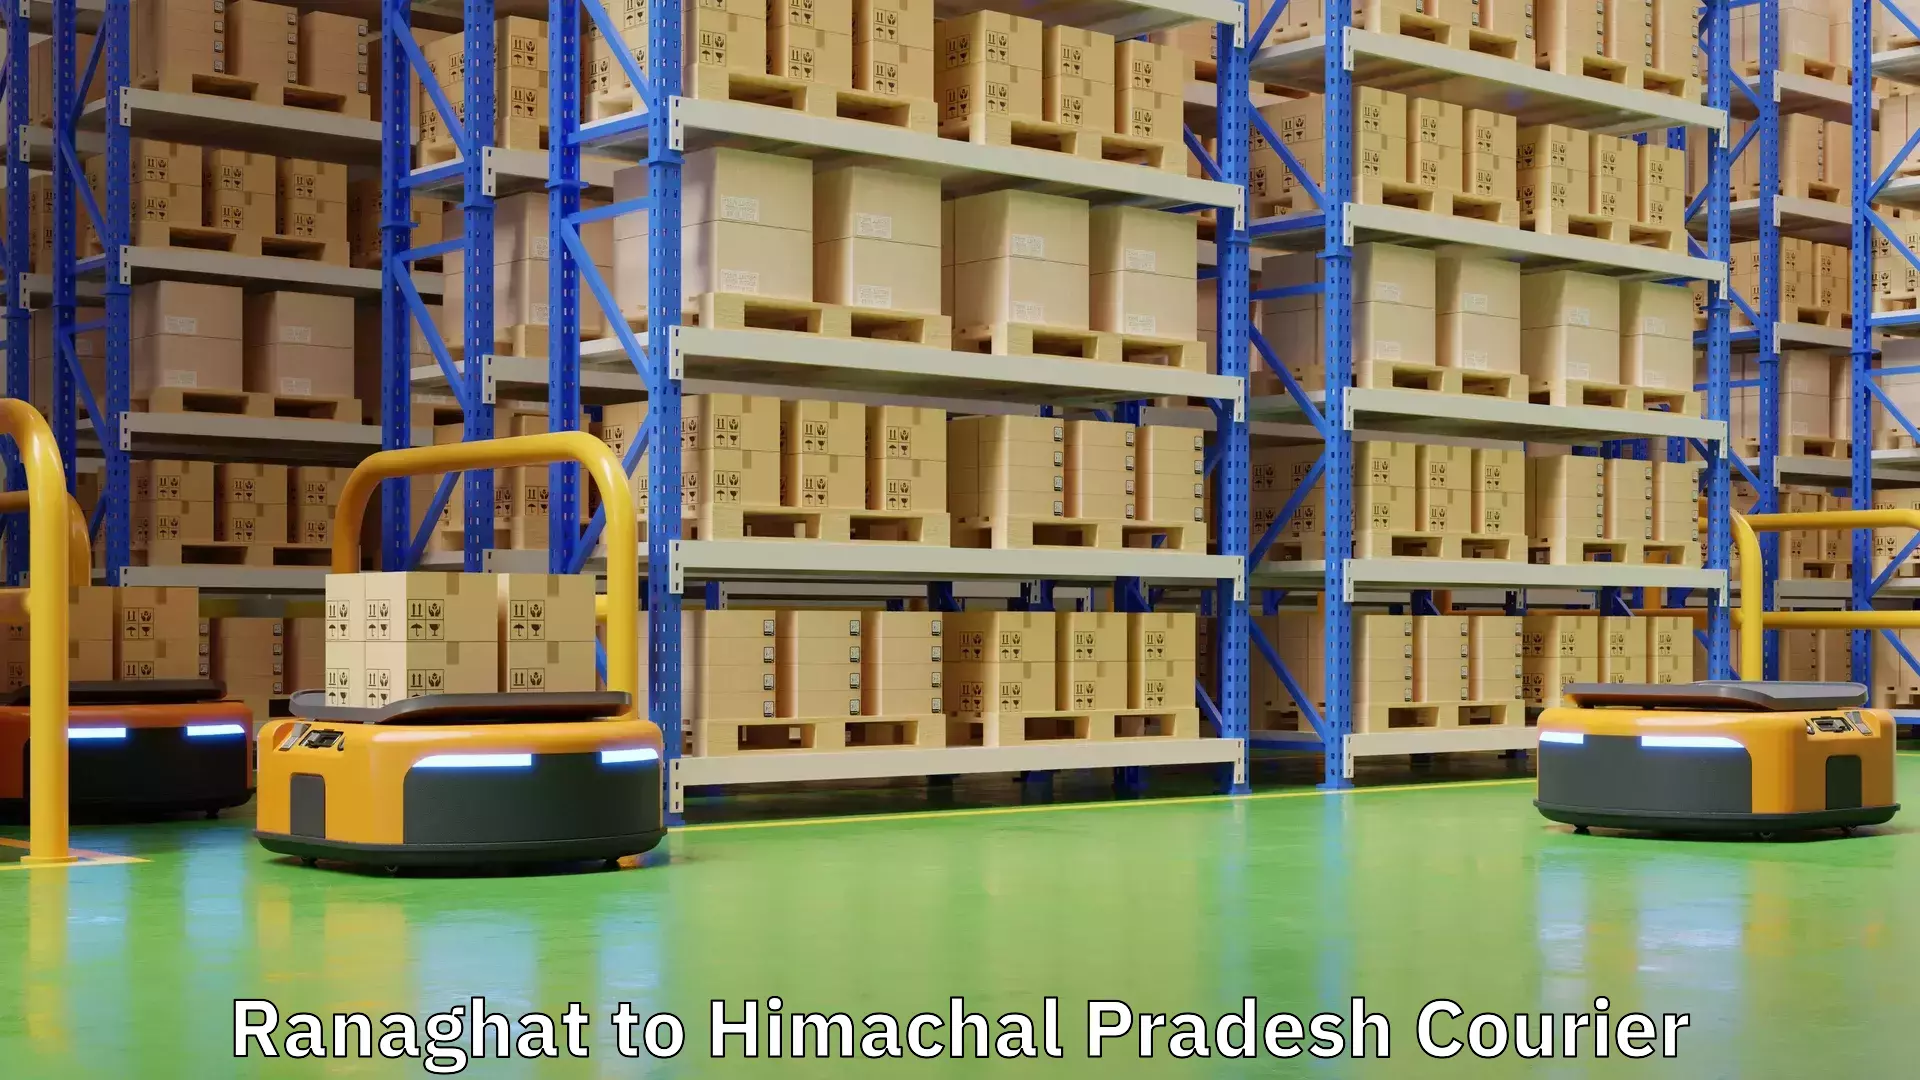 Global courier networks Ranaghat to Himachal Pradesh